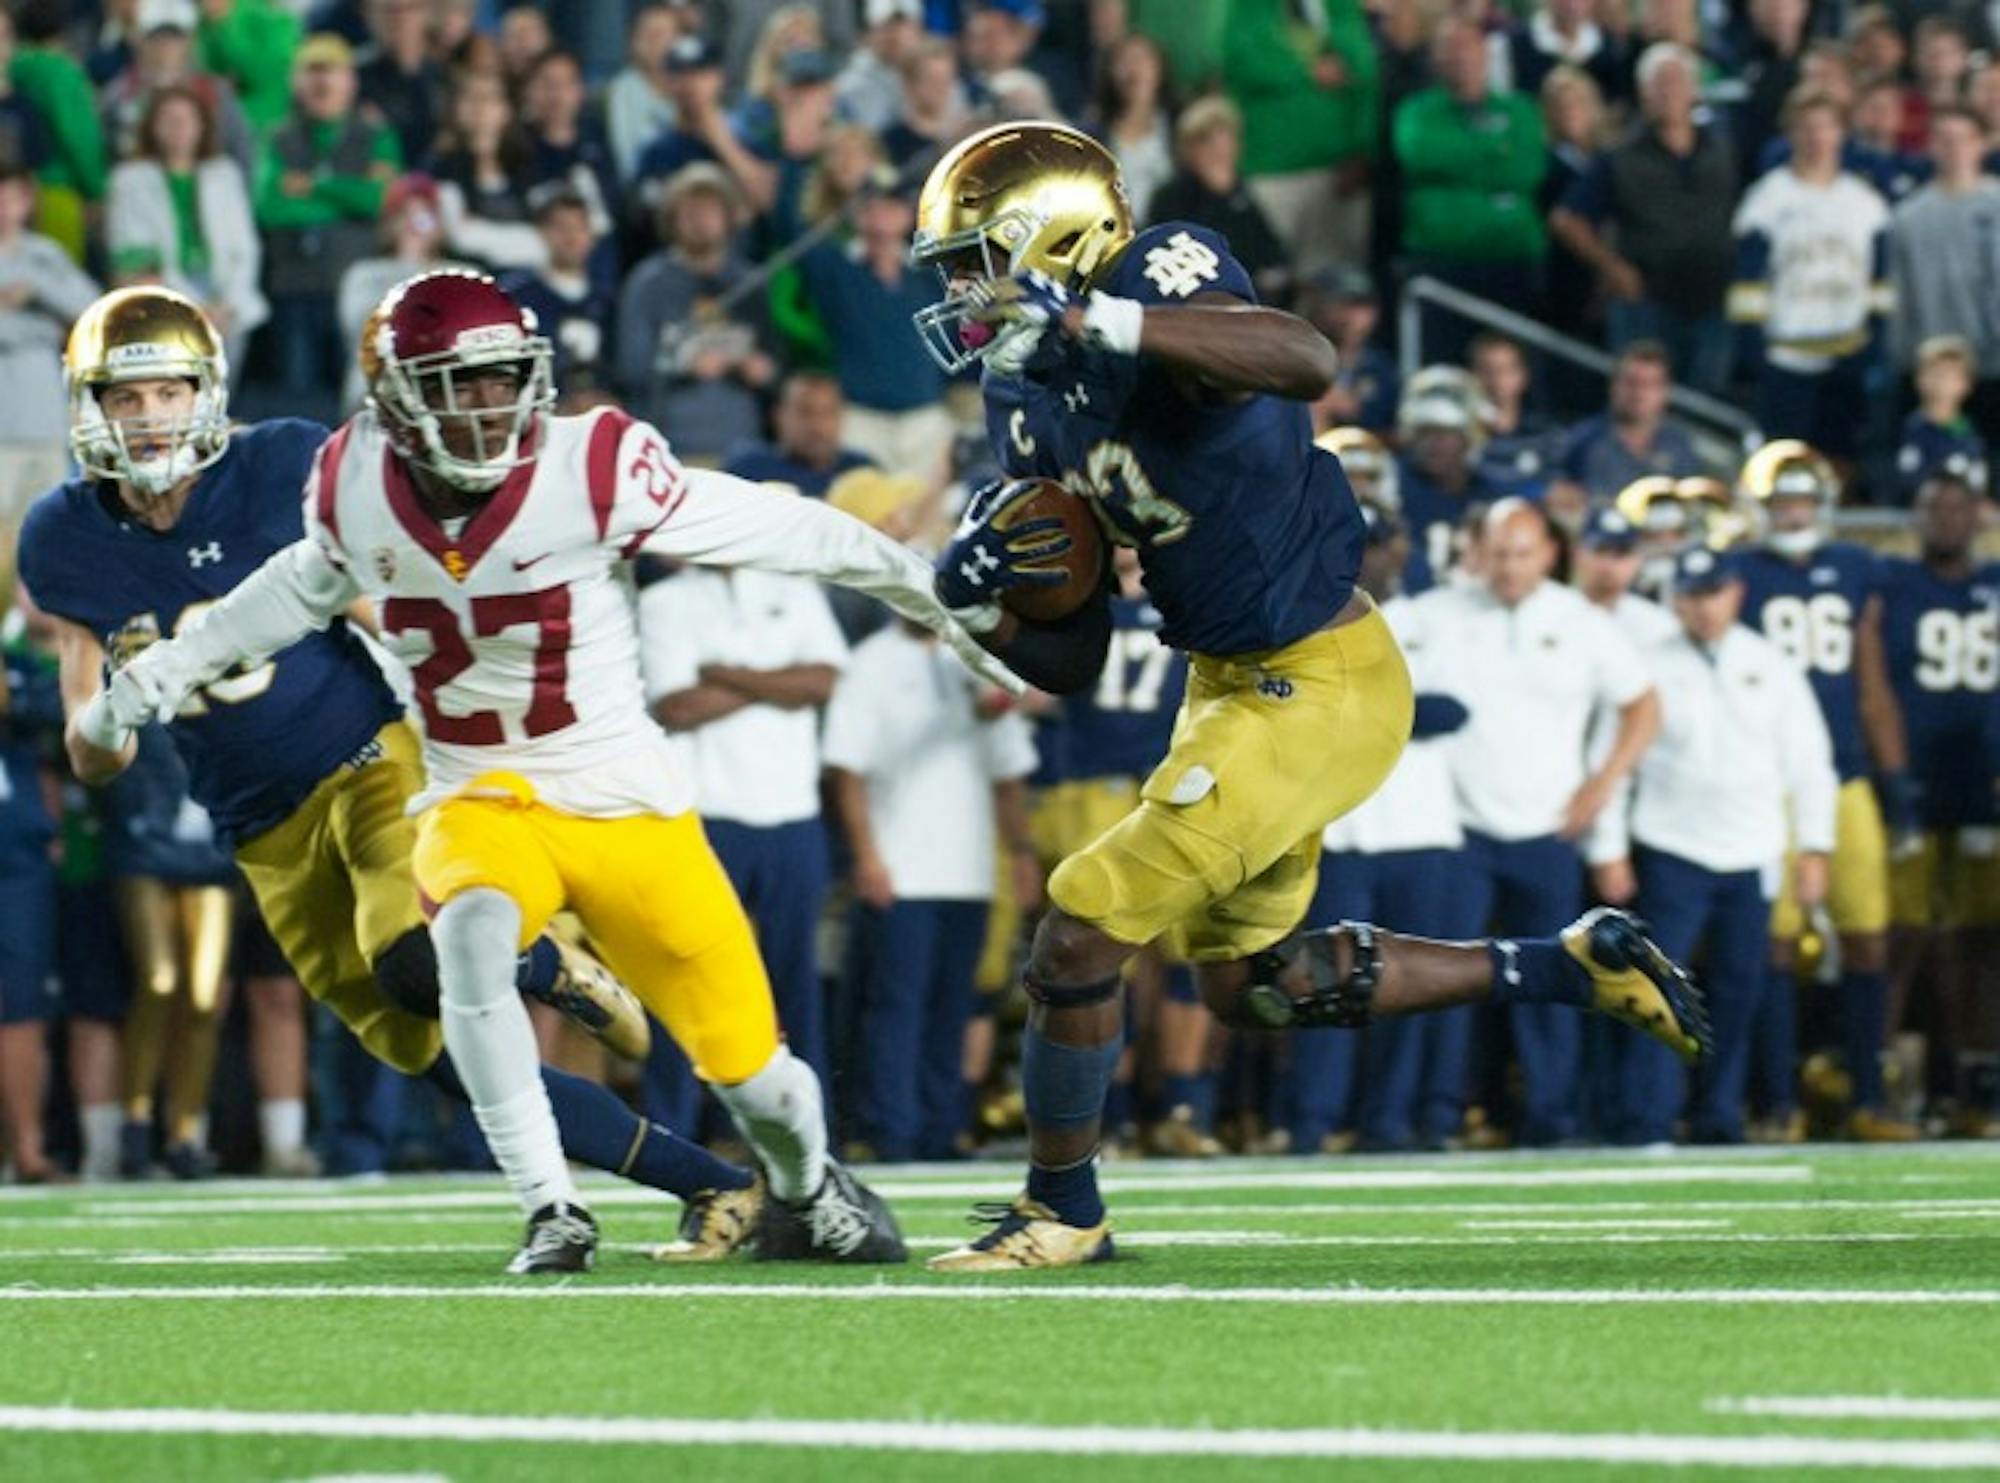 Irish junior running back Josh Adams rushes past a defender during Notre Dame’s 49-14 victory over  USC on Saturday at Notre Dame Stadium. Adams tallied 191 yards on 19 carries in the game.